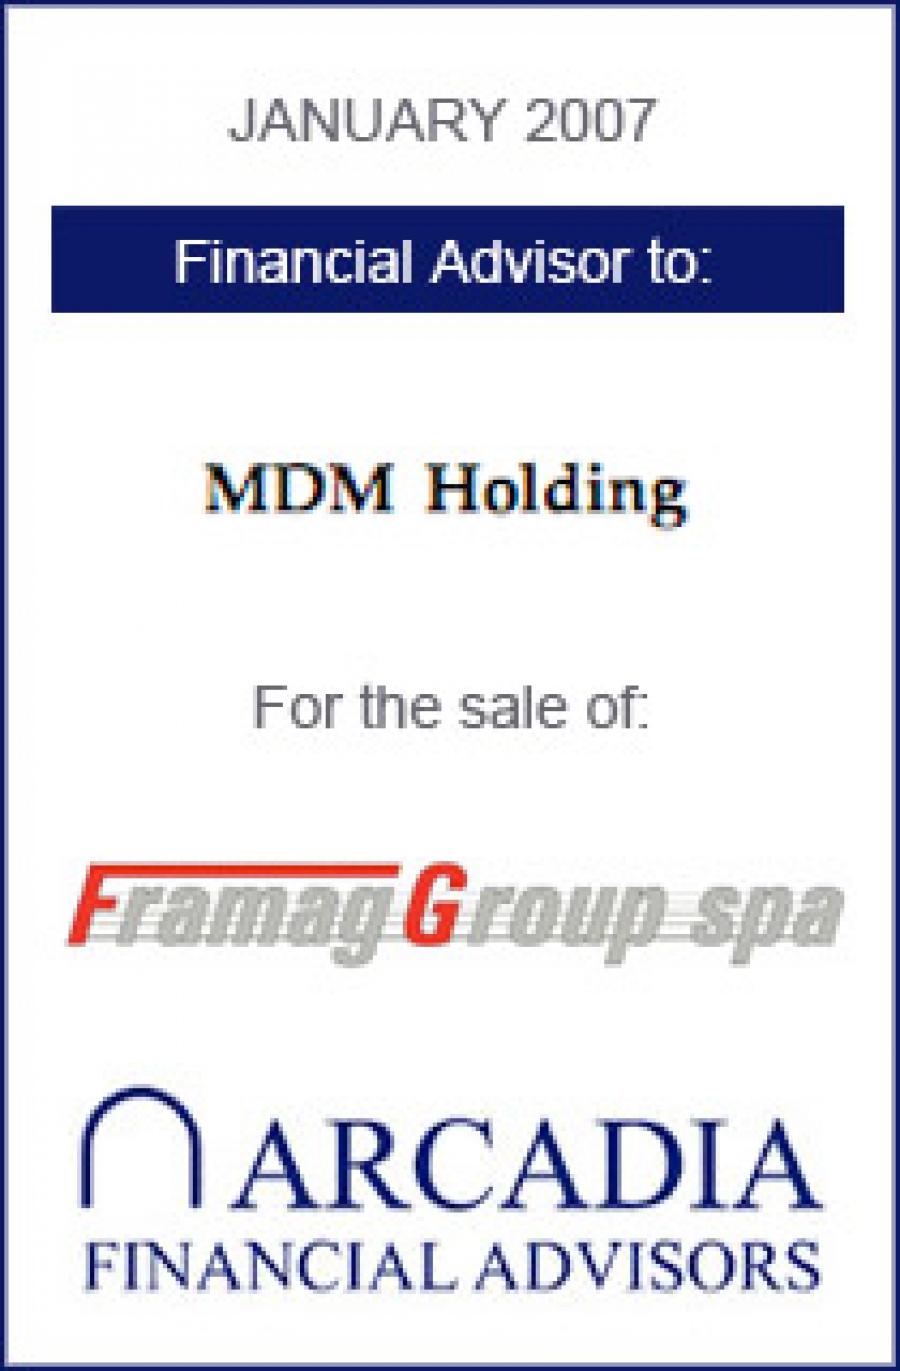 Transaction completed with MDM Holding